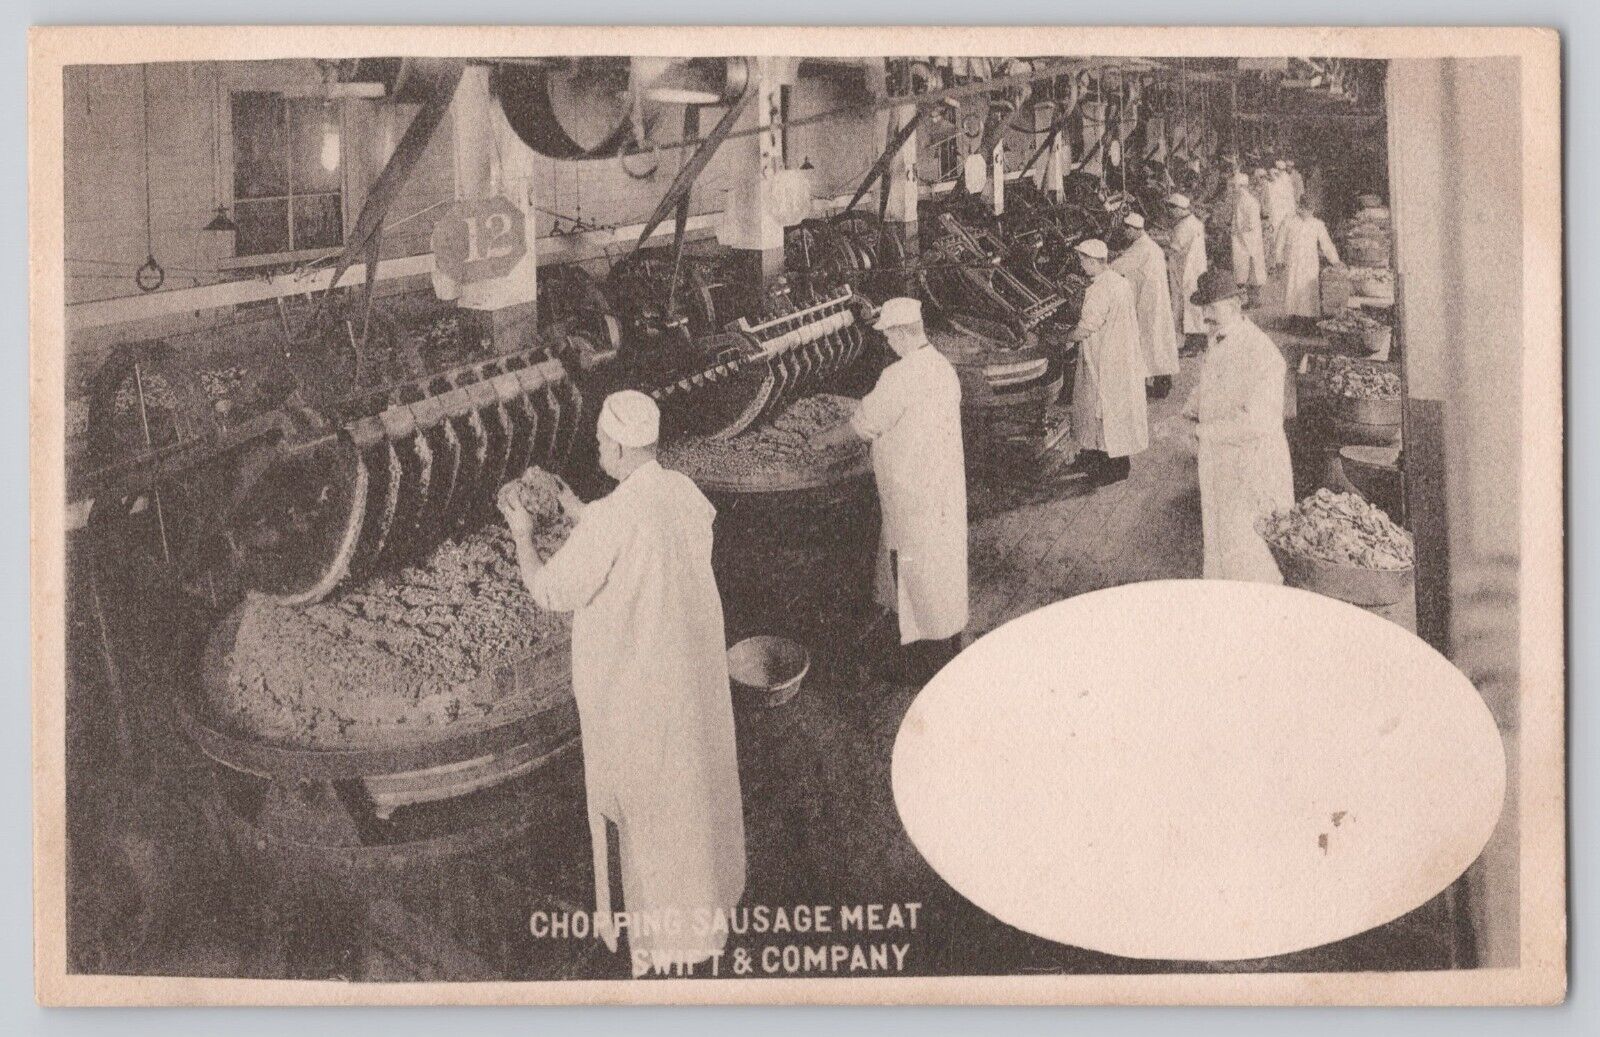 CHOPPING SAUSAGE MEAT Swift & Company Advertisement Postcard Packing House